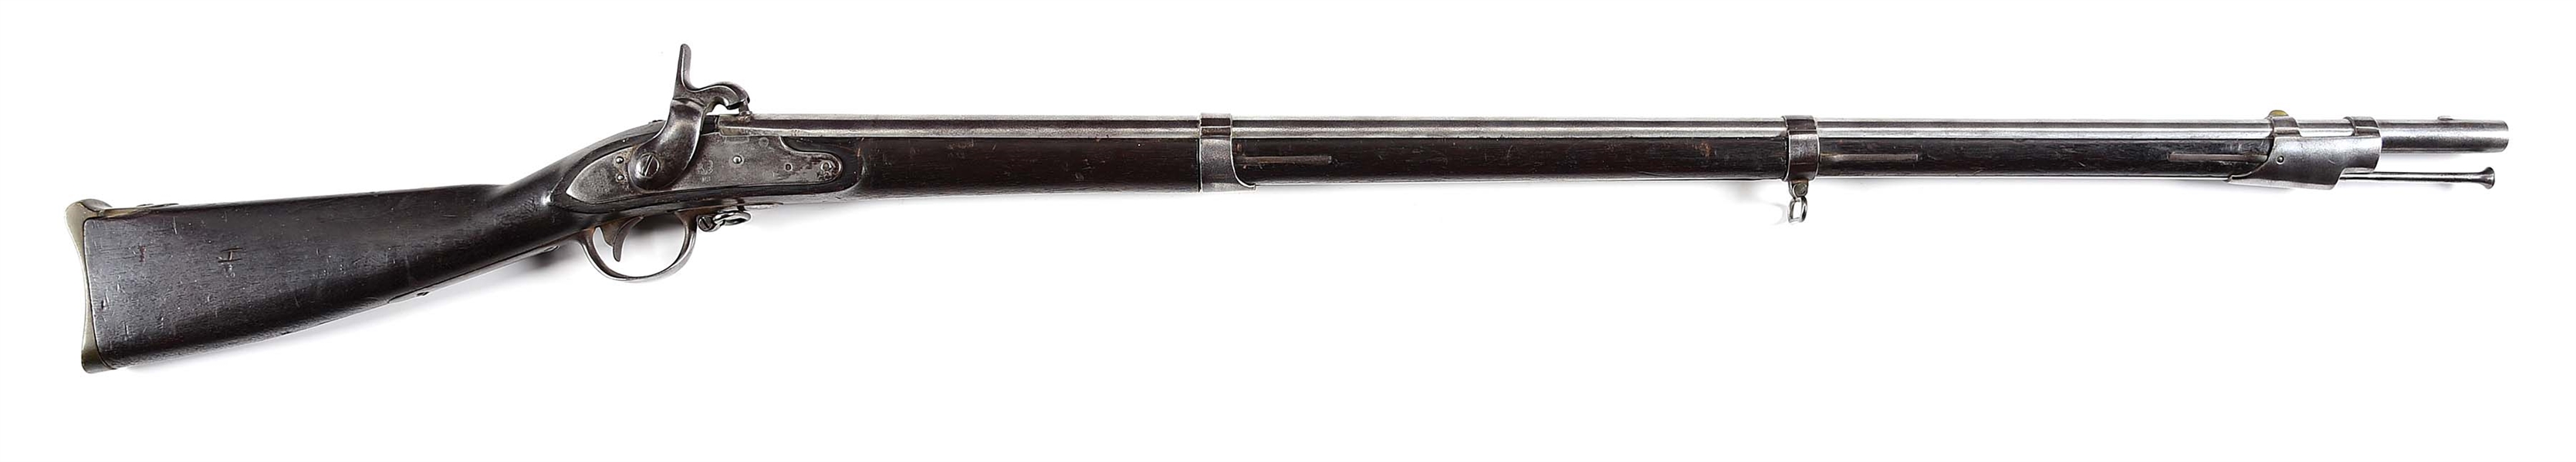 (A) MASSACHUSETTS MILITIA MARKED SPRINGFIELD M1816 SO-CALLED "SEA FENCIBLES" PERCUSSION MUSKET.